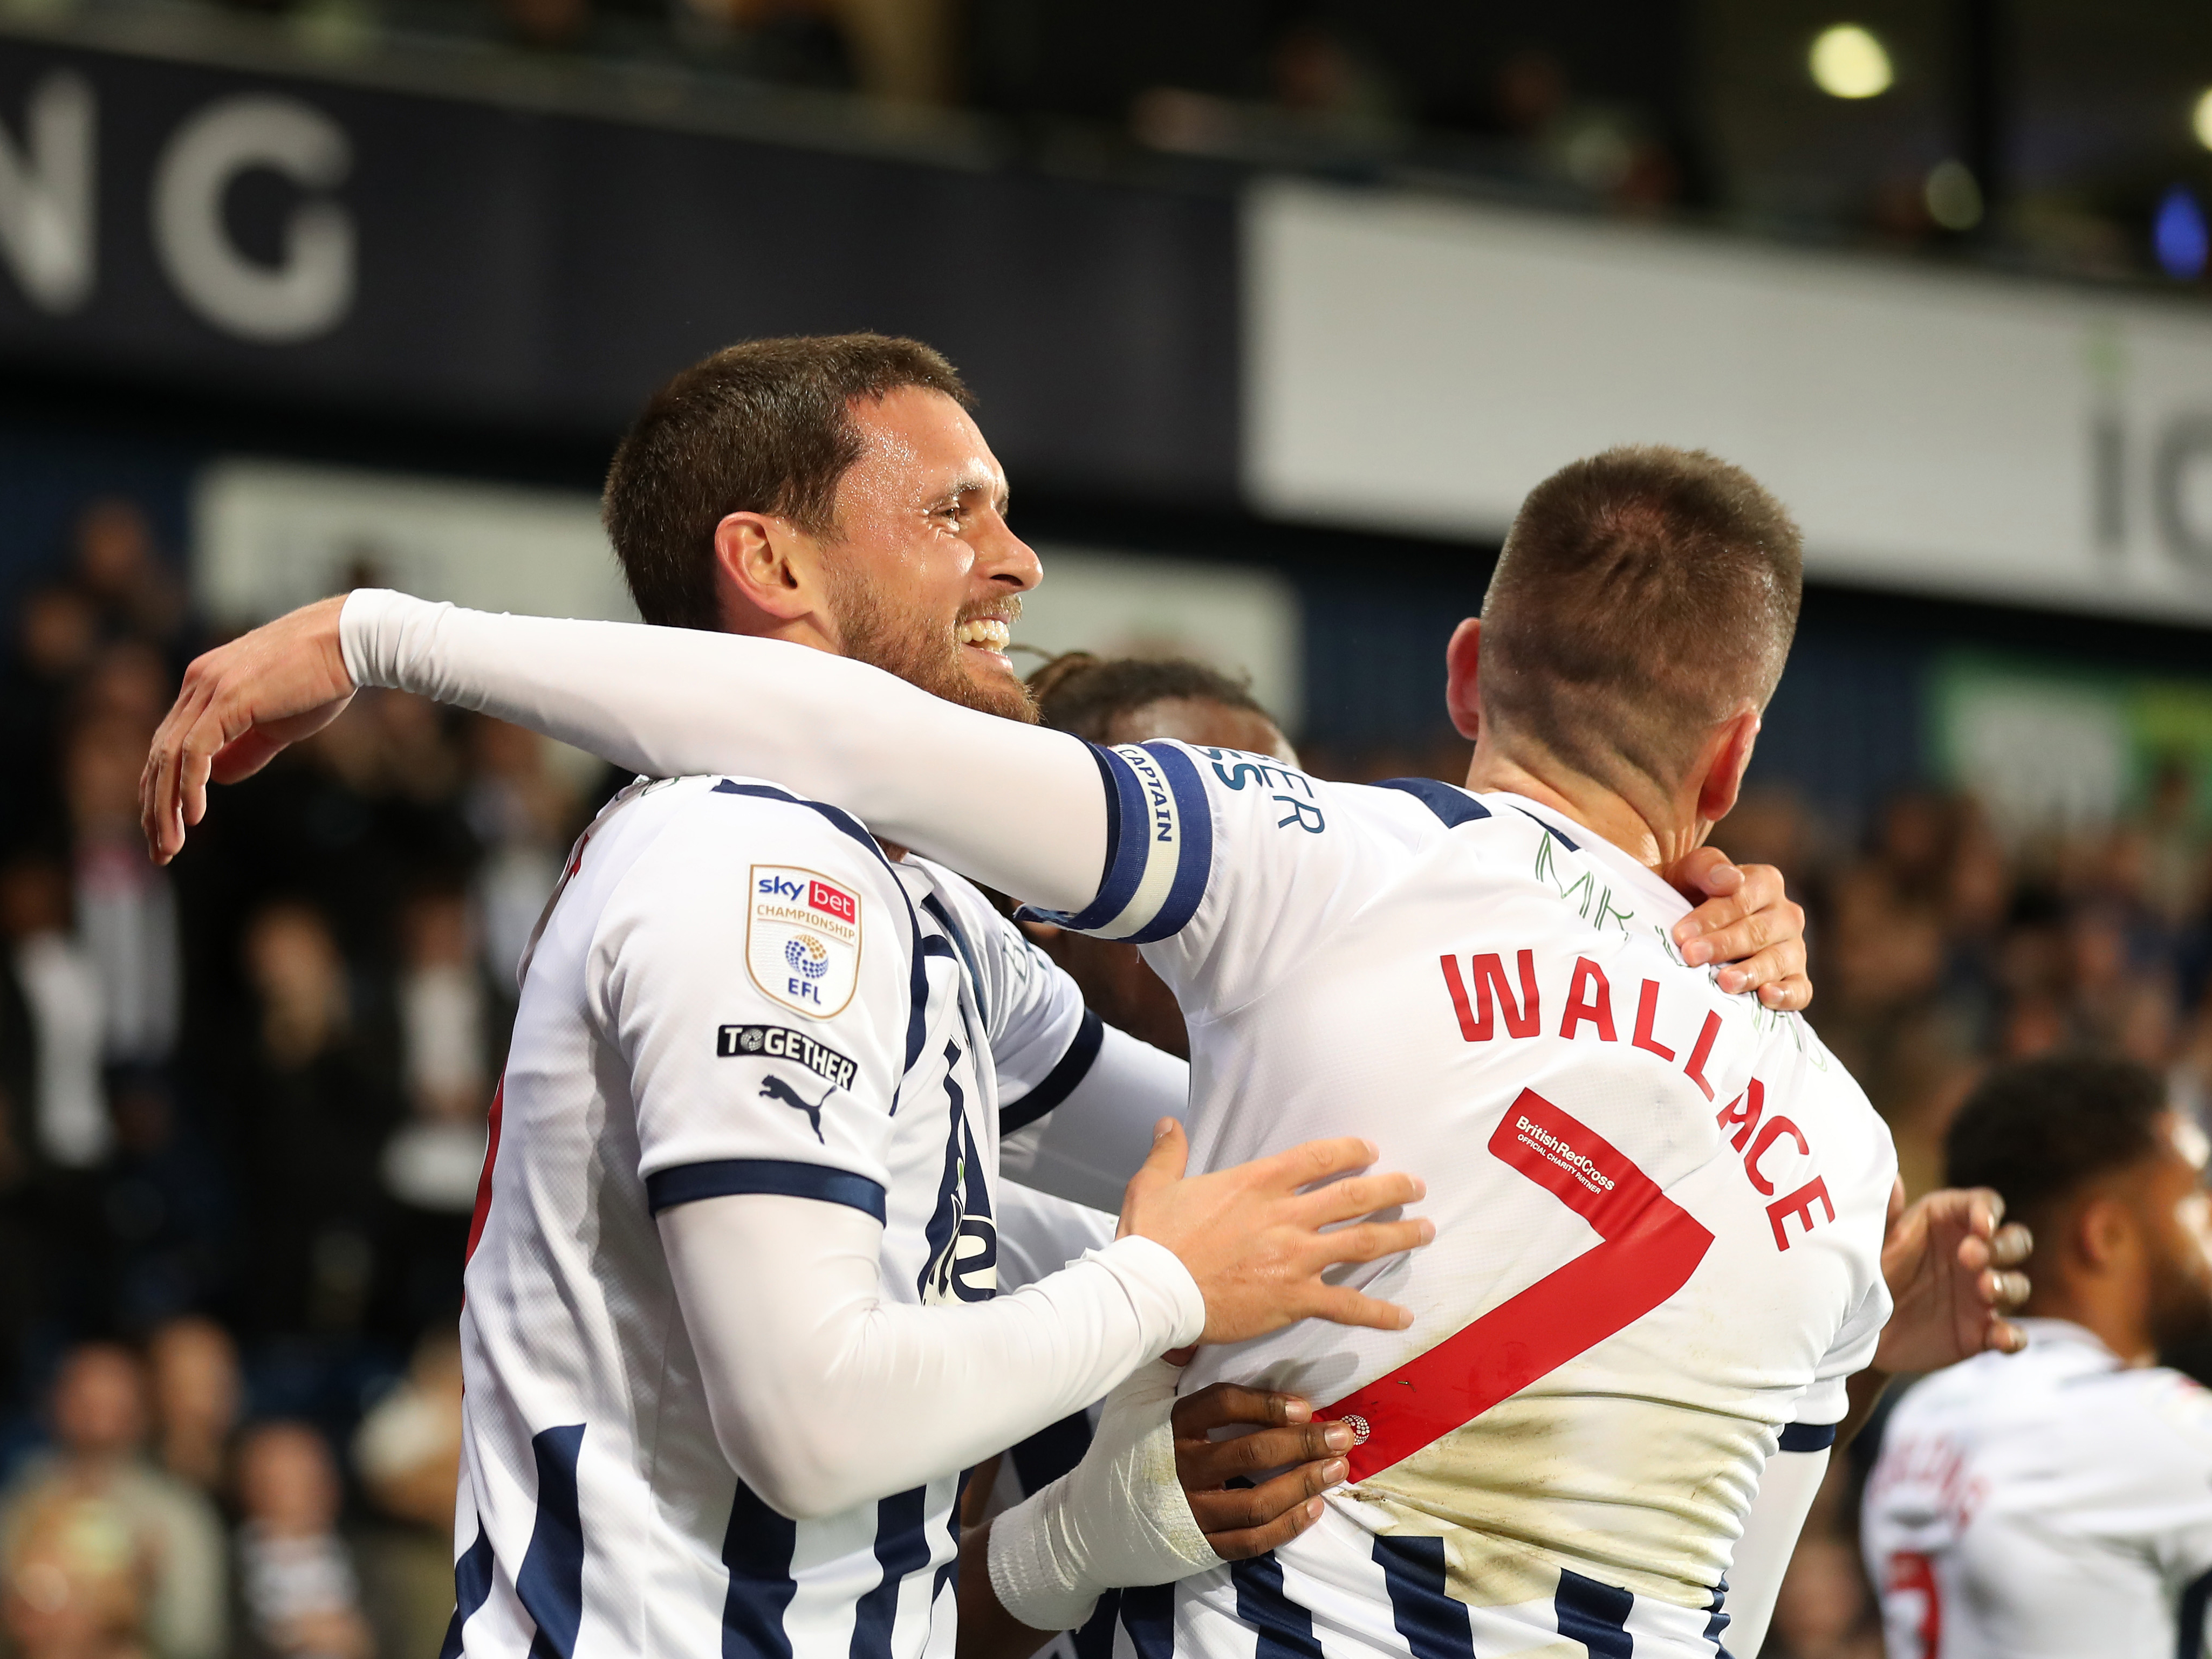 John Swift celebrates scoring a goal for Albion with Jed Wallace while wearing the home kit 